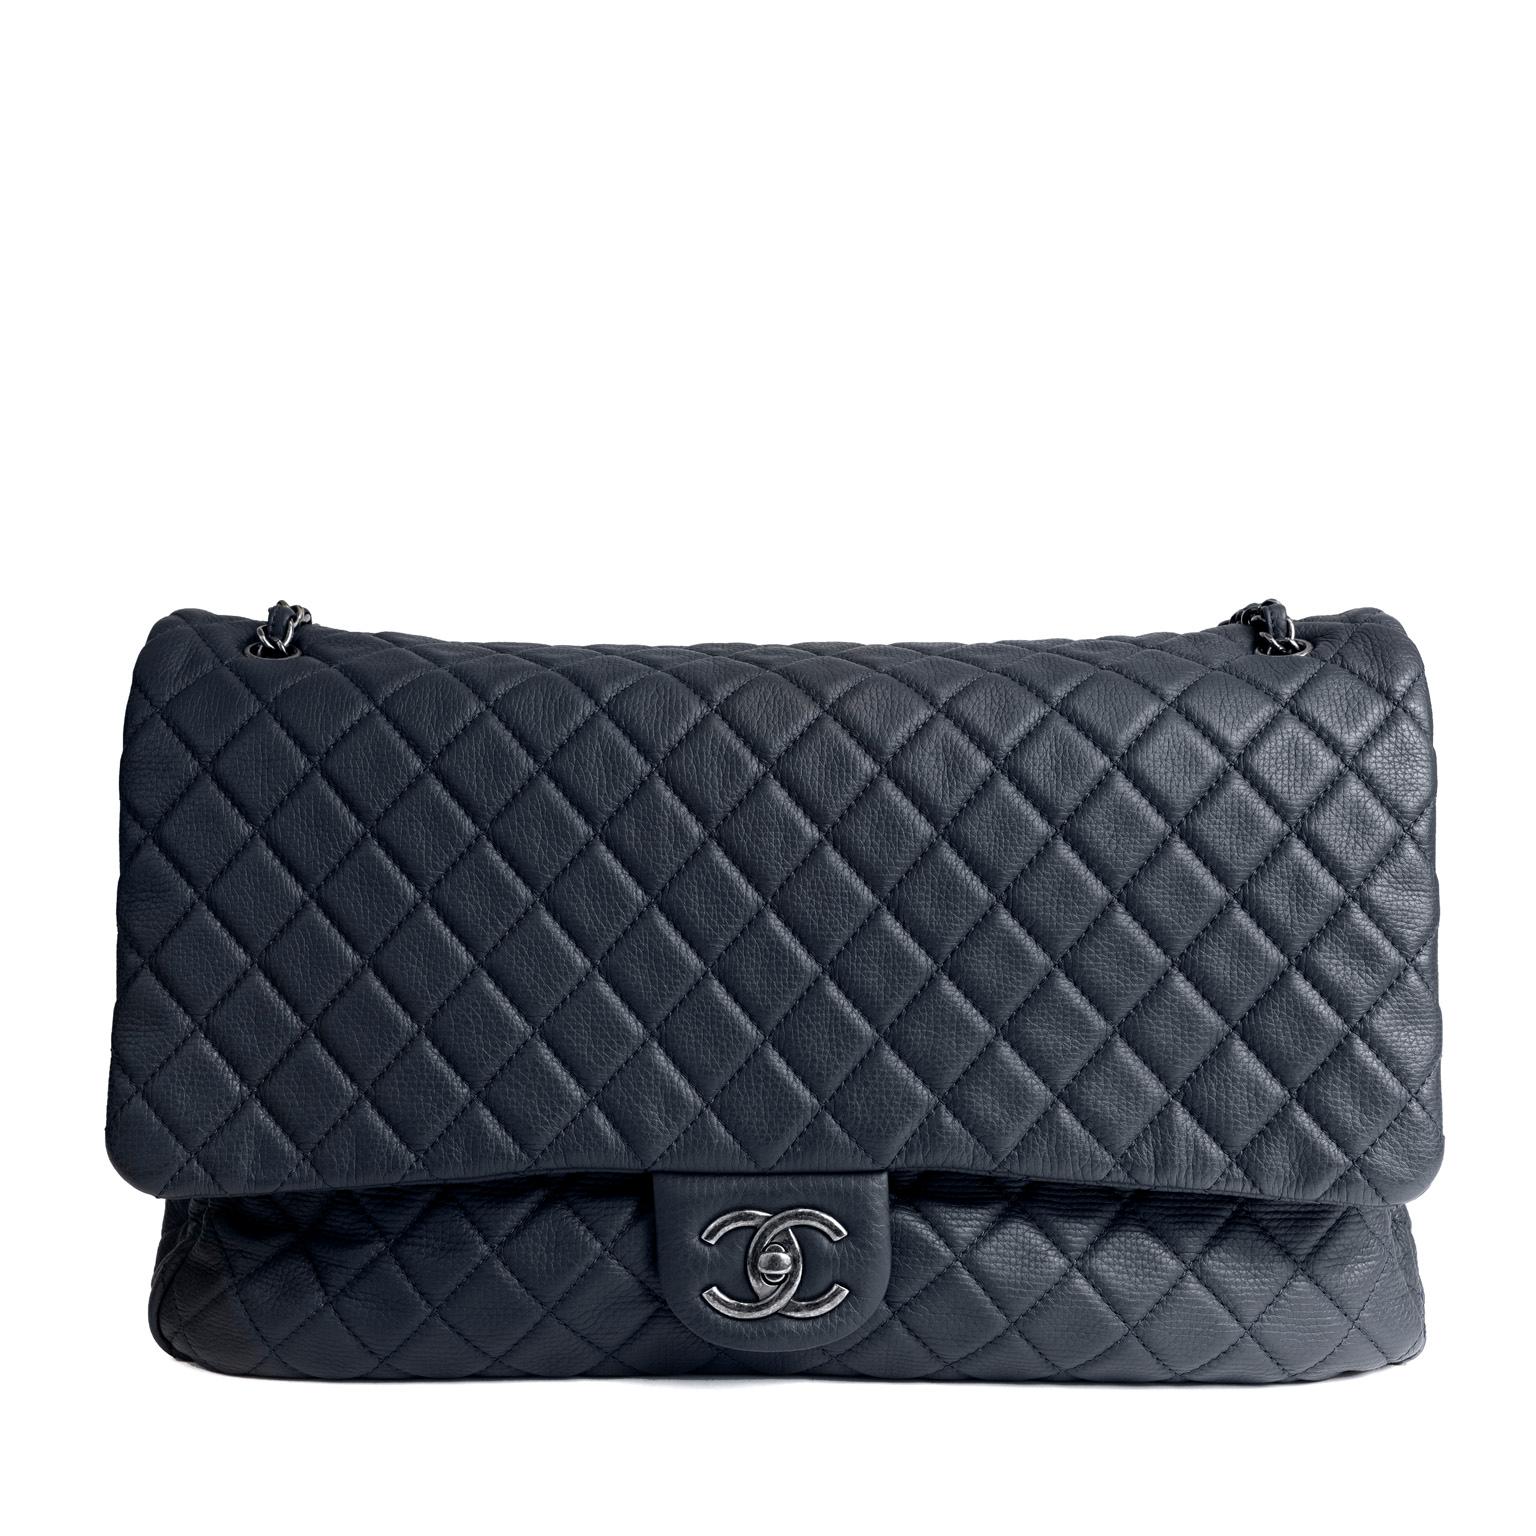 This authentic Chanel Navy Classic Travel XXL Flap Bag is in pristine condition.  Most certainly the chicest way to travel, this extra-large Classic Flap will get you there in style.
Deep navy-blue textured calfskin is quilted in signature Chanel